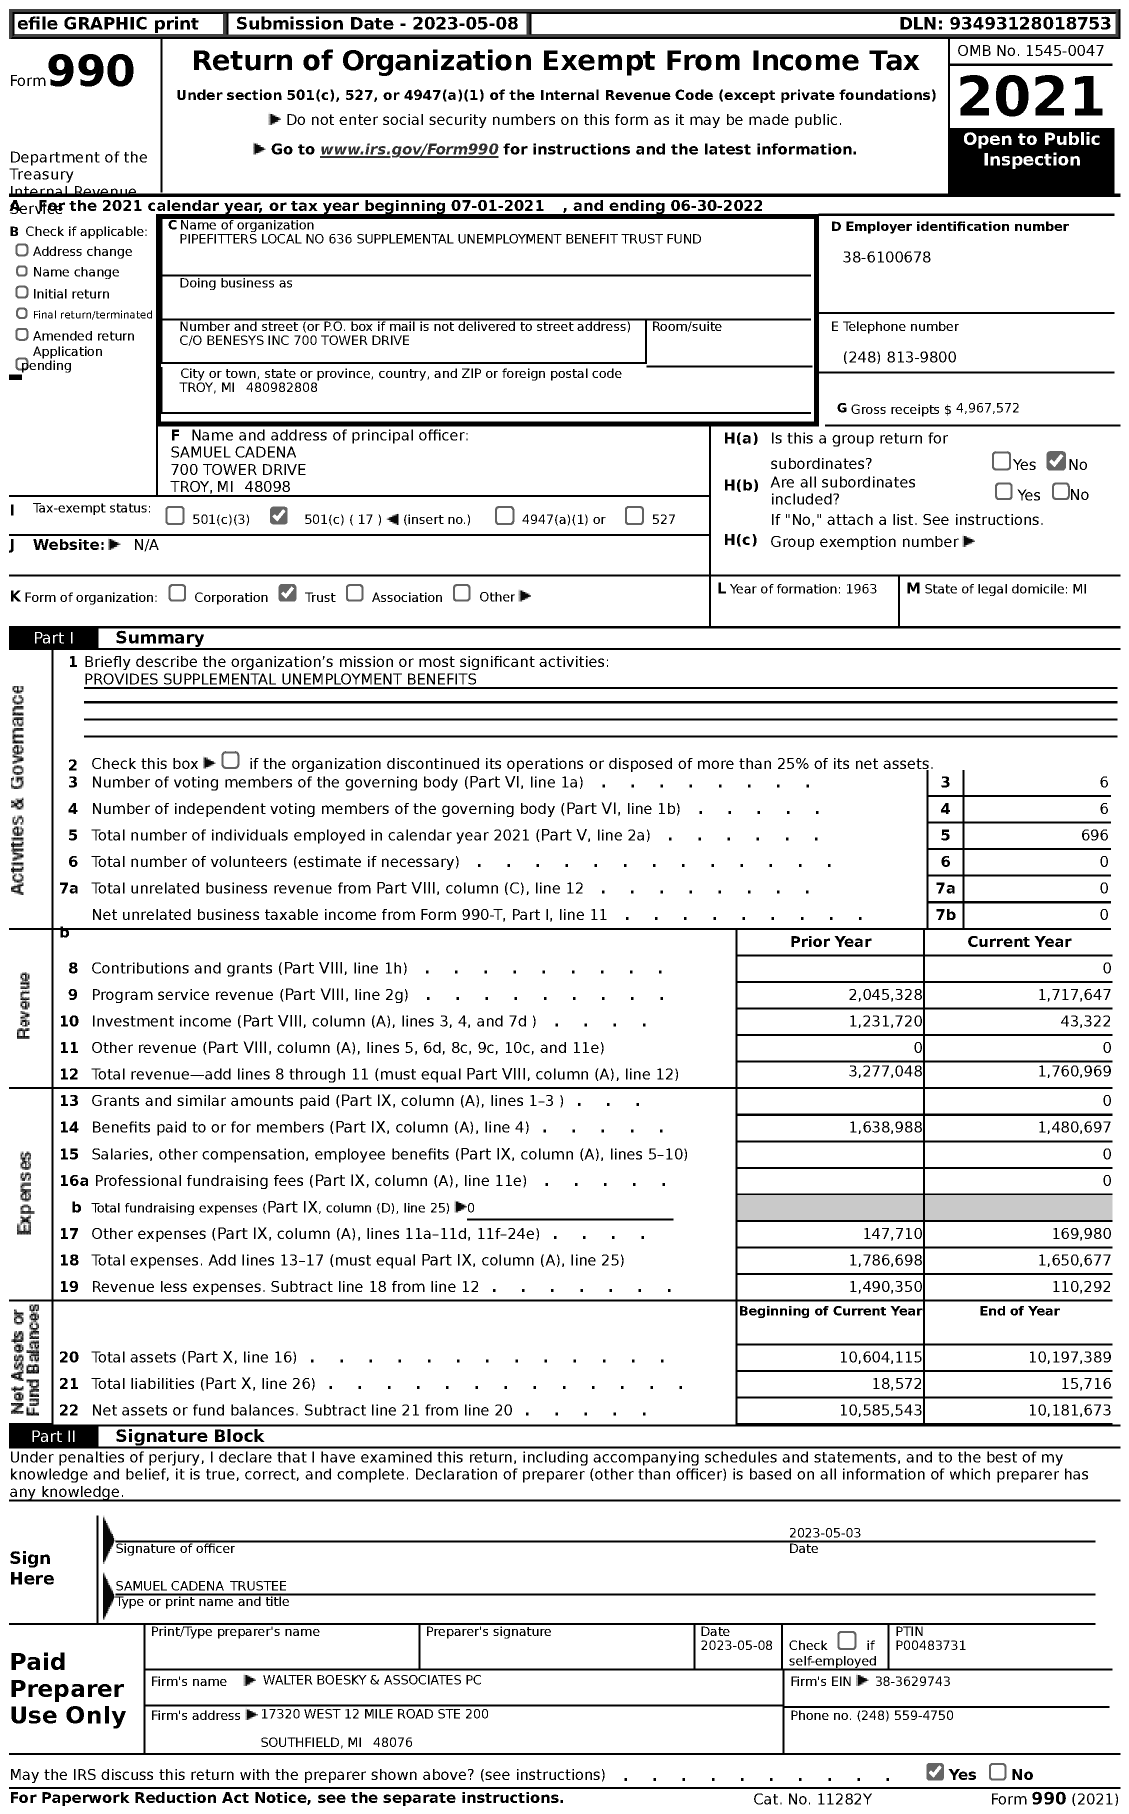 Image of first page of 2021 Form 990 for Pipefitters Local No 636 Supplemental Unemployment Benefit Trust Fund